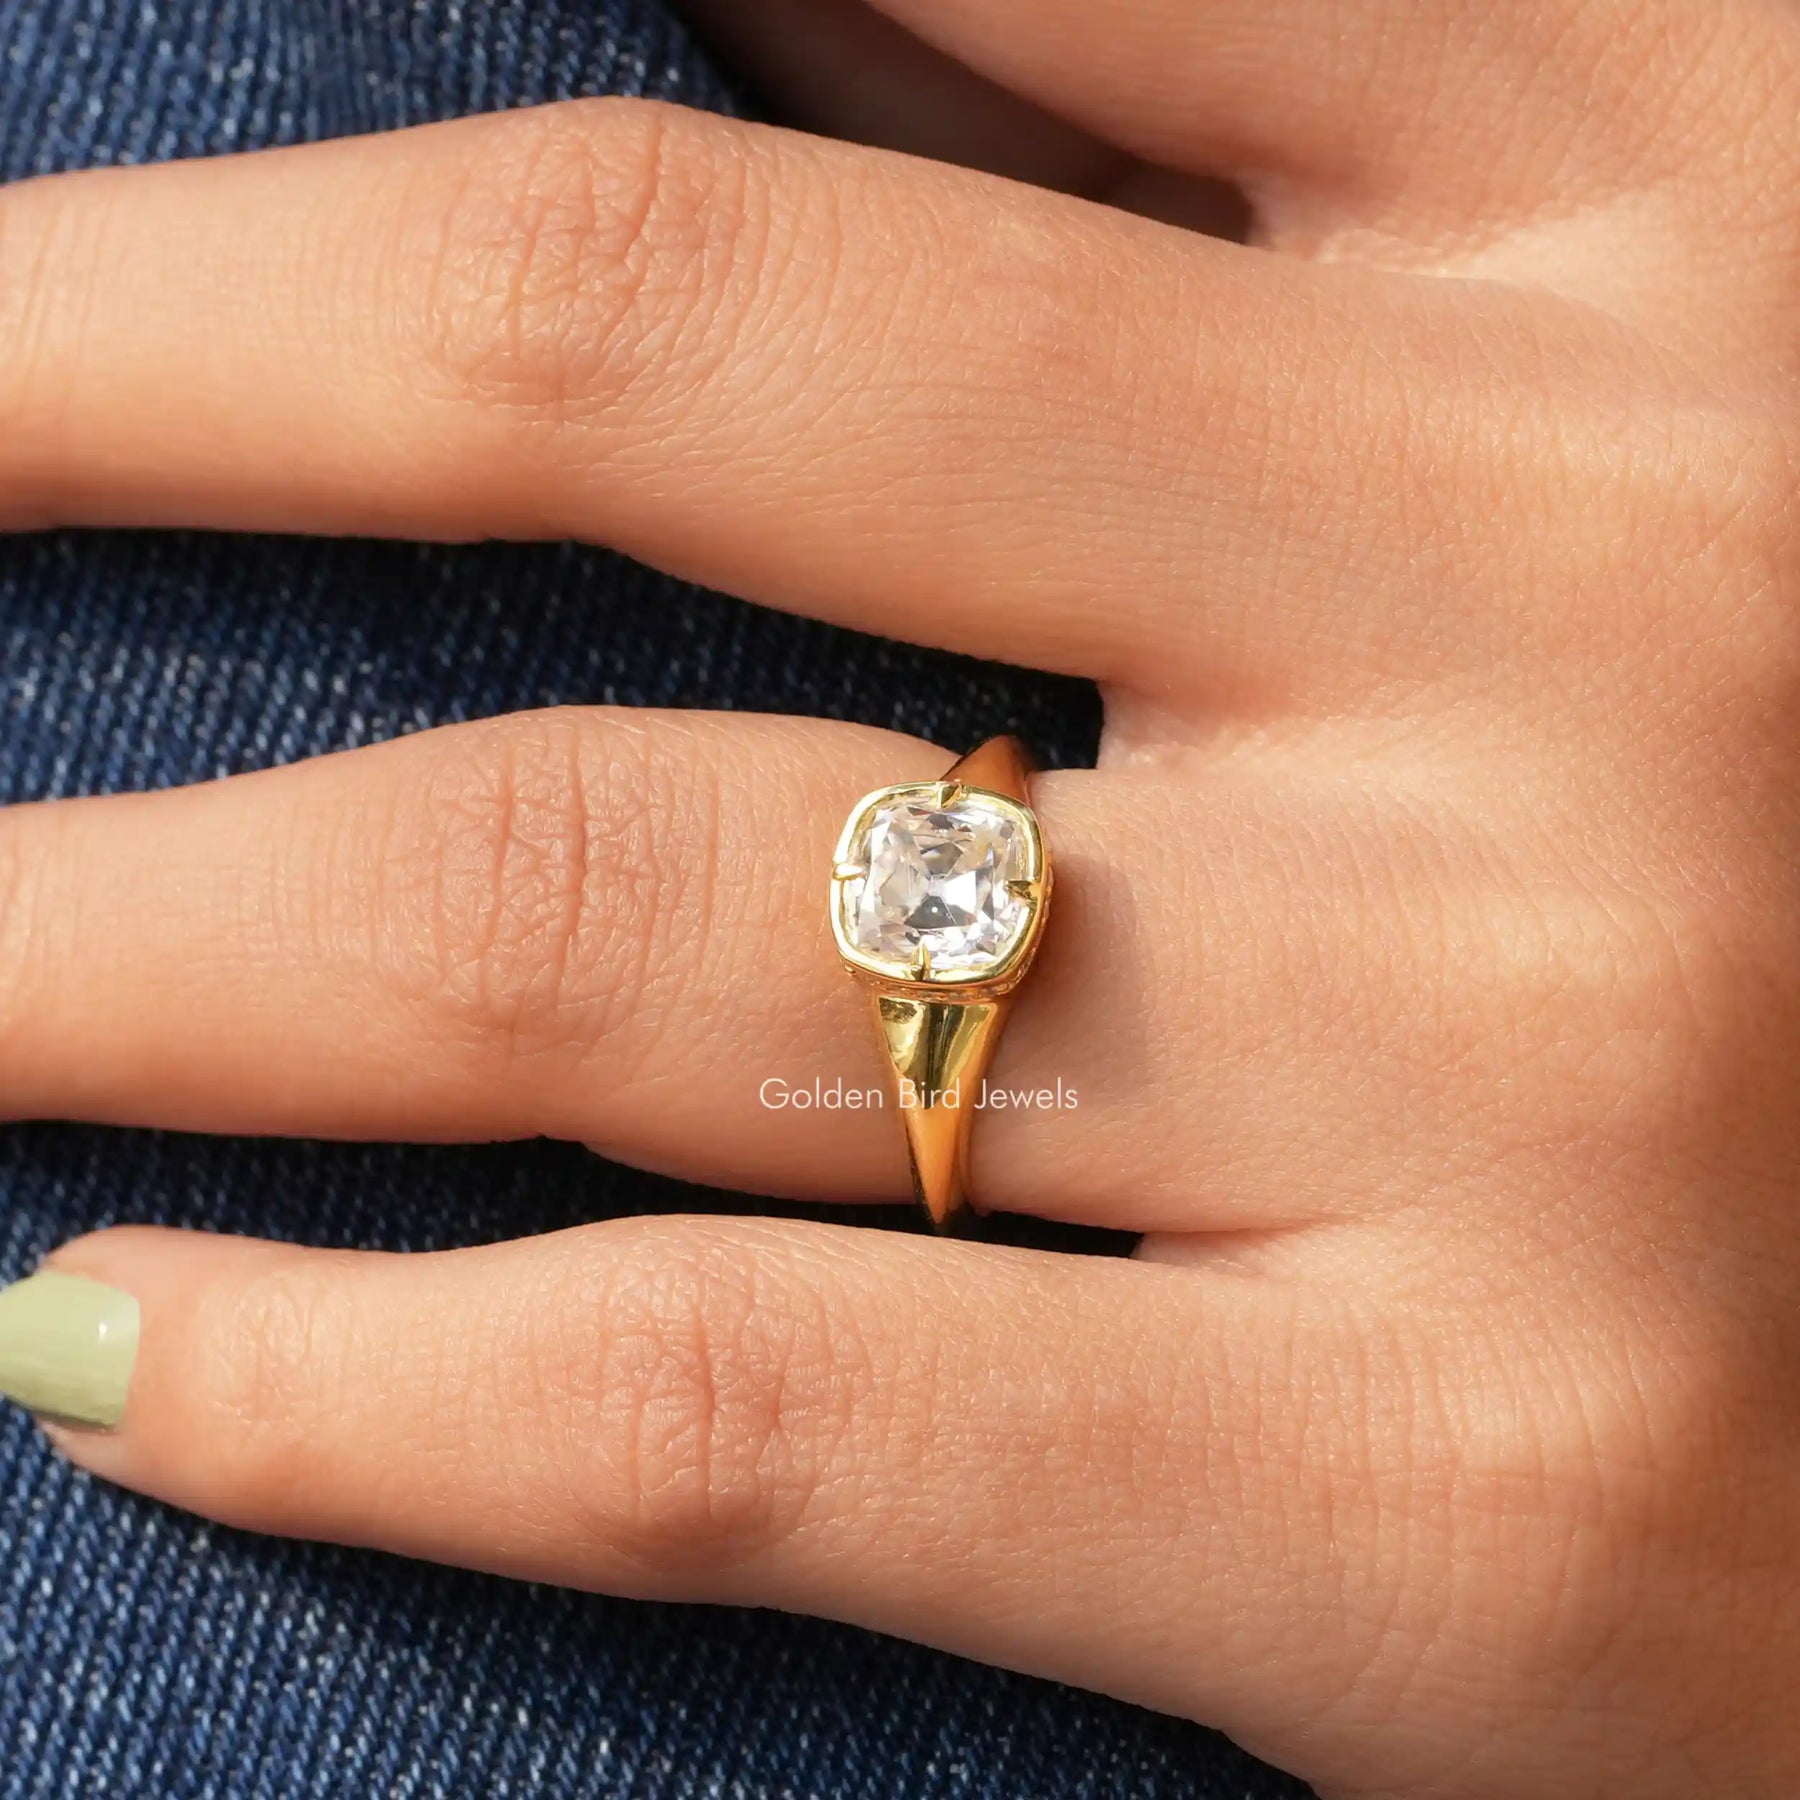 [This yellow gold cushion cut moissanite ring made of prong setting]-[Golden Bird Jewels]